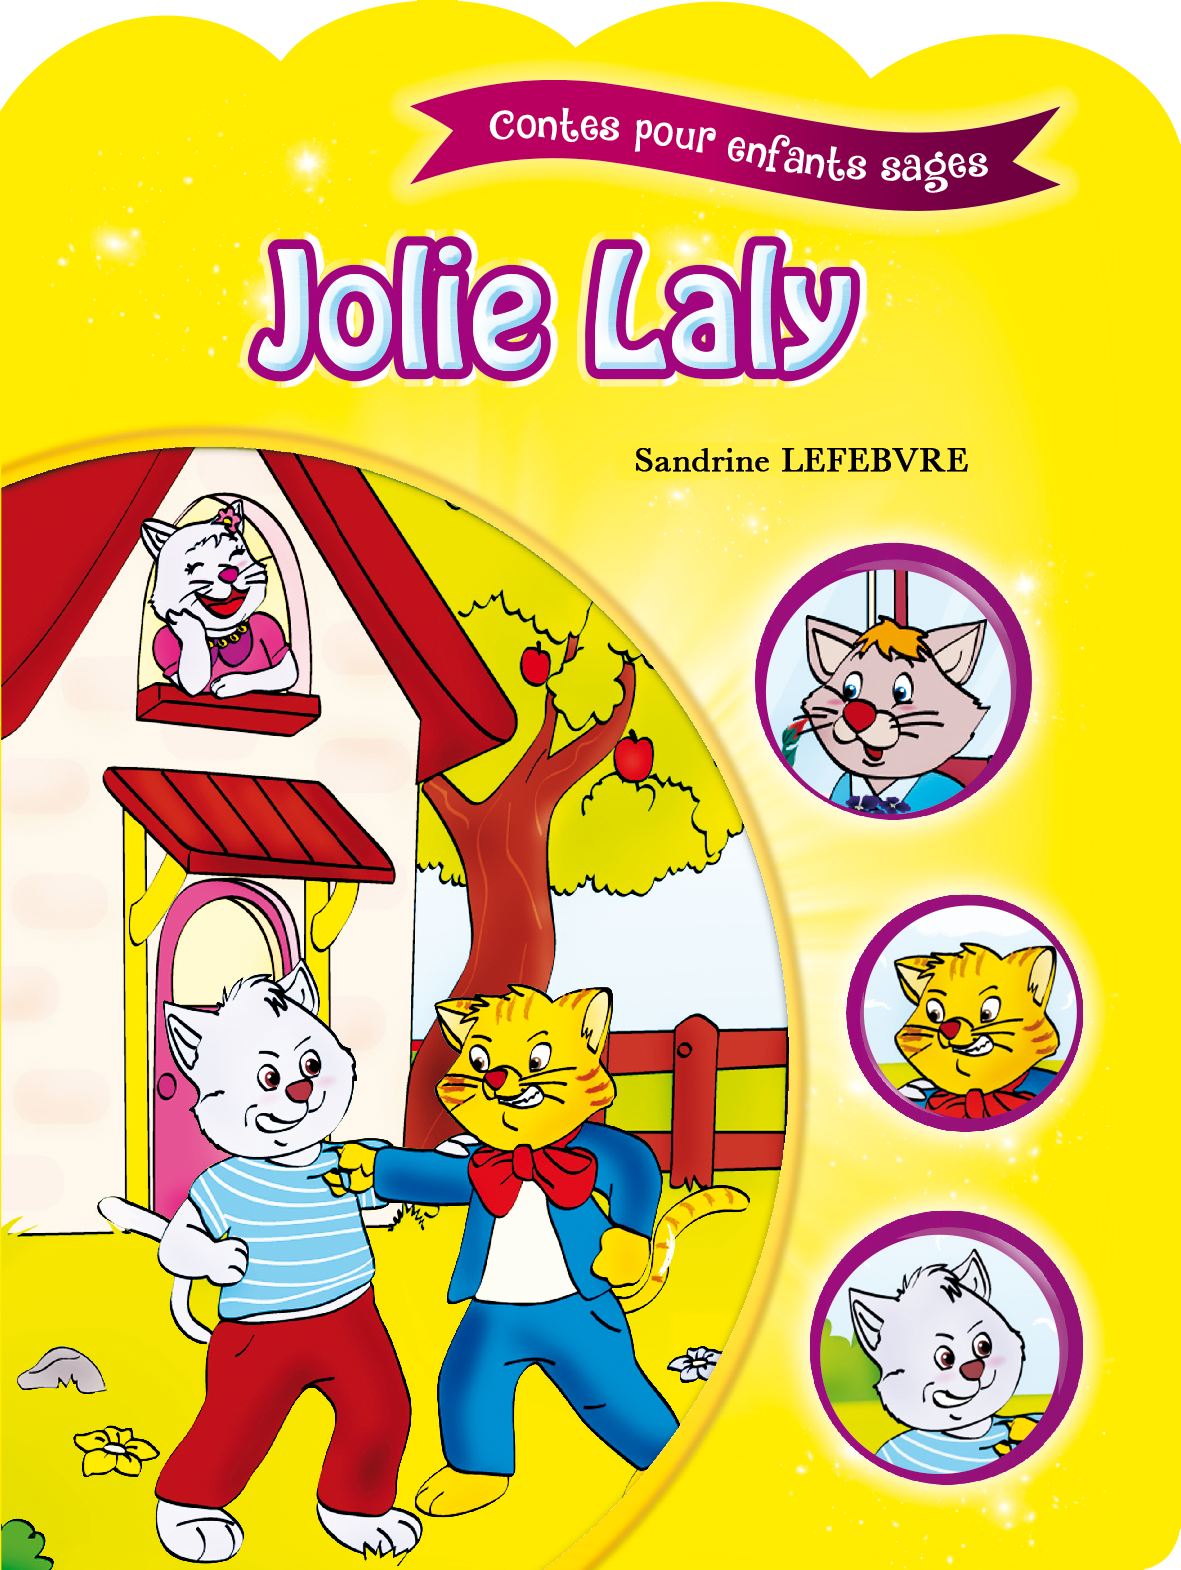 Jolie laly